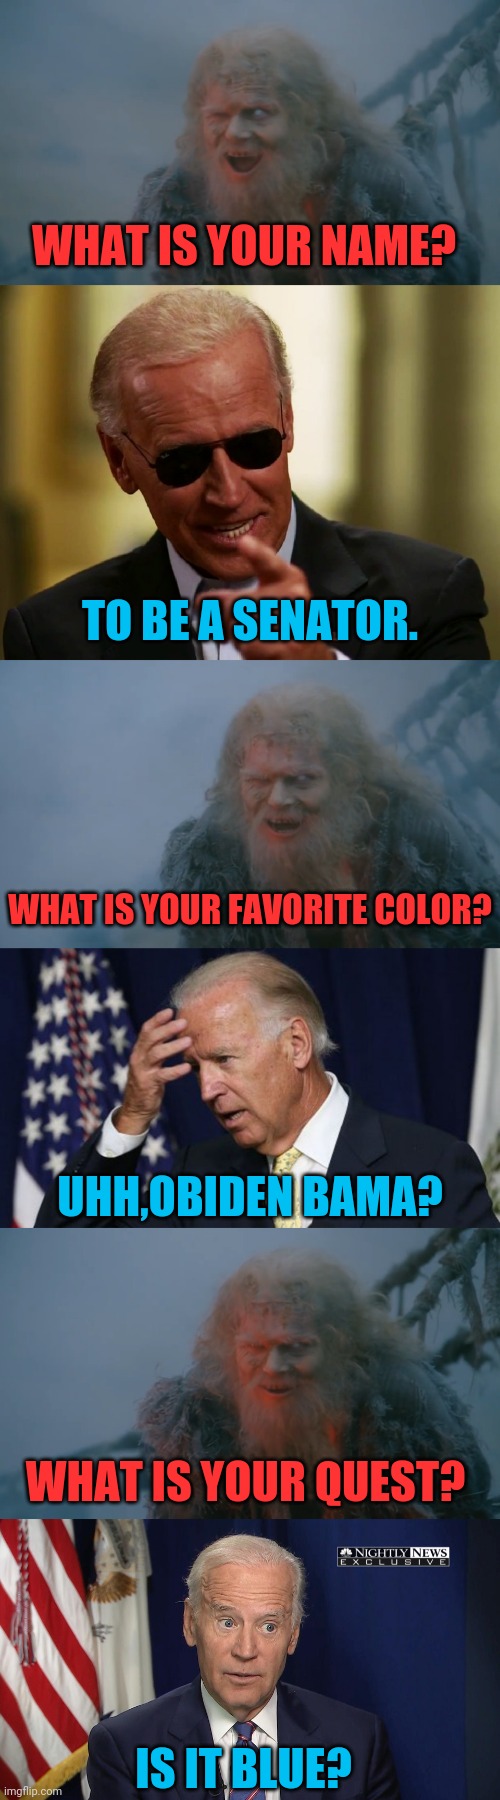 MSM Asking Dementia Joe Softball Questions | WHAT IS YOUR NAME? TO BE A SENATOR. WHAT IS YOUR FAVORITE COLOR? UHH,OBIDEN BAMA? WHAT IS YOUR QUEST? IS IT BLUE? | image tagged in cool joe biden,joe biden worries,corn pop,drstrangmeme,monty python and the holy grail,msm | made w/ Imgflip meme maker